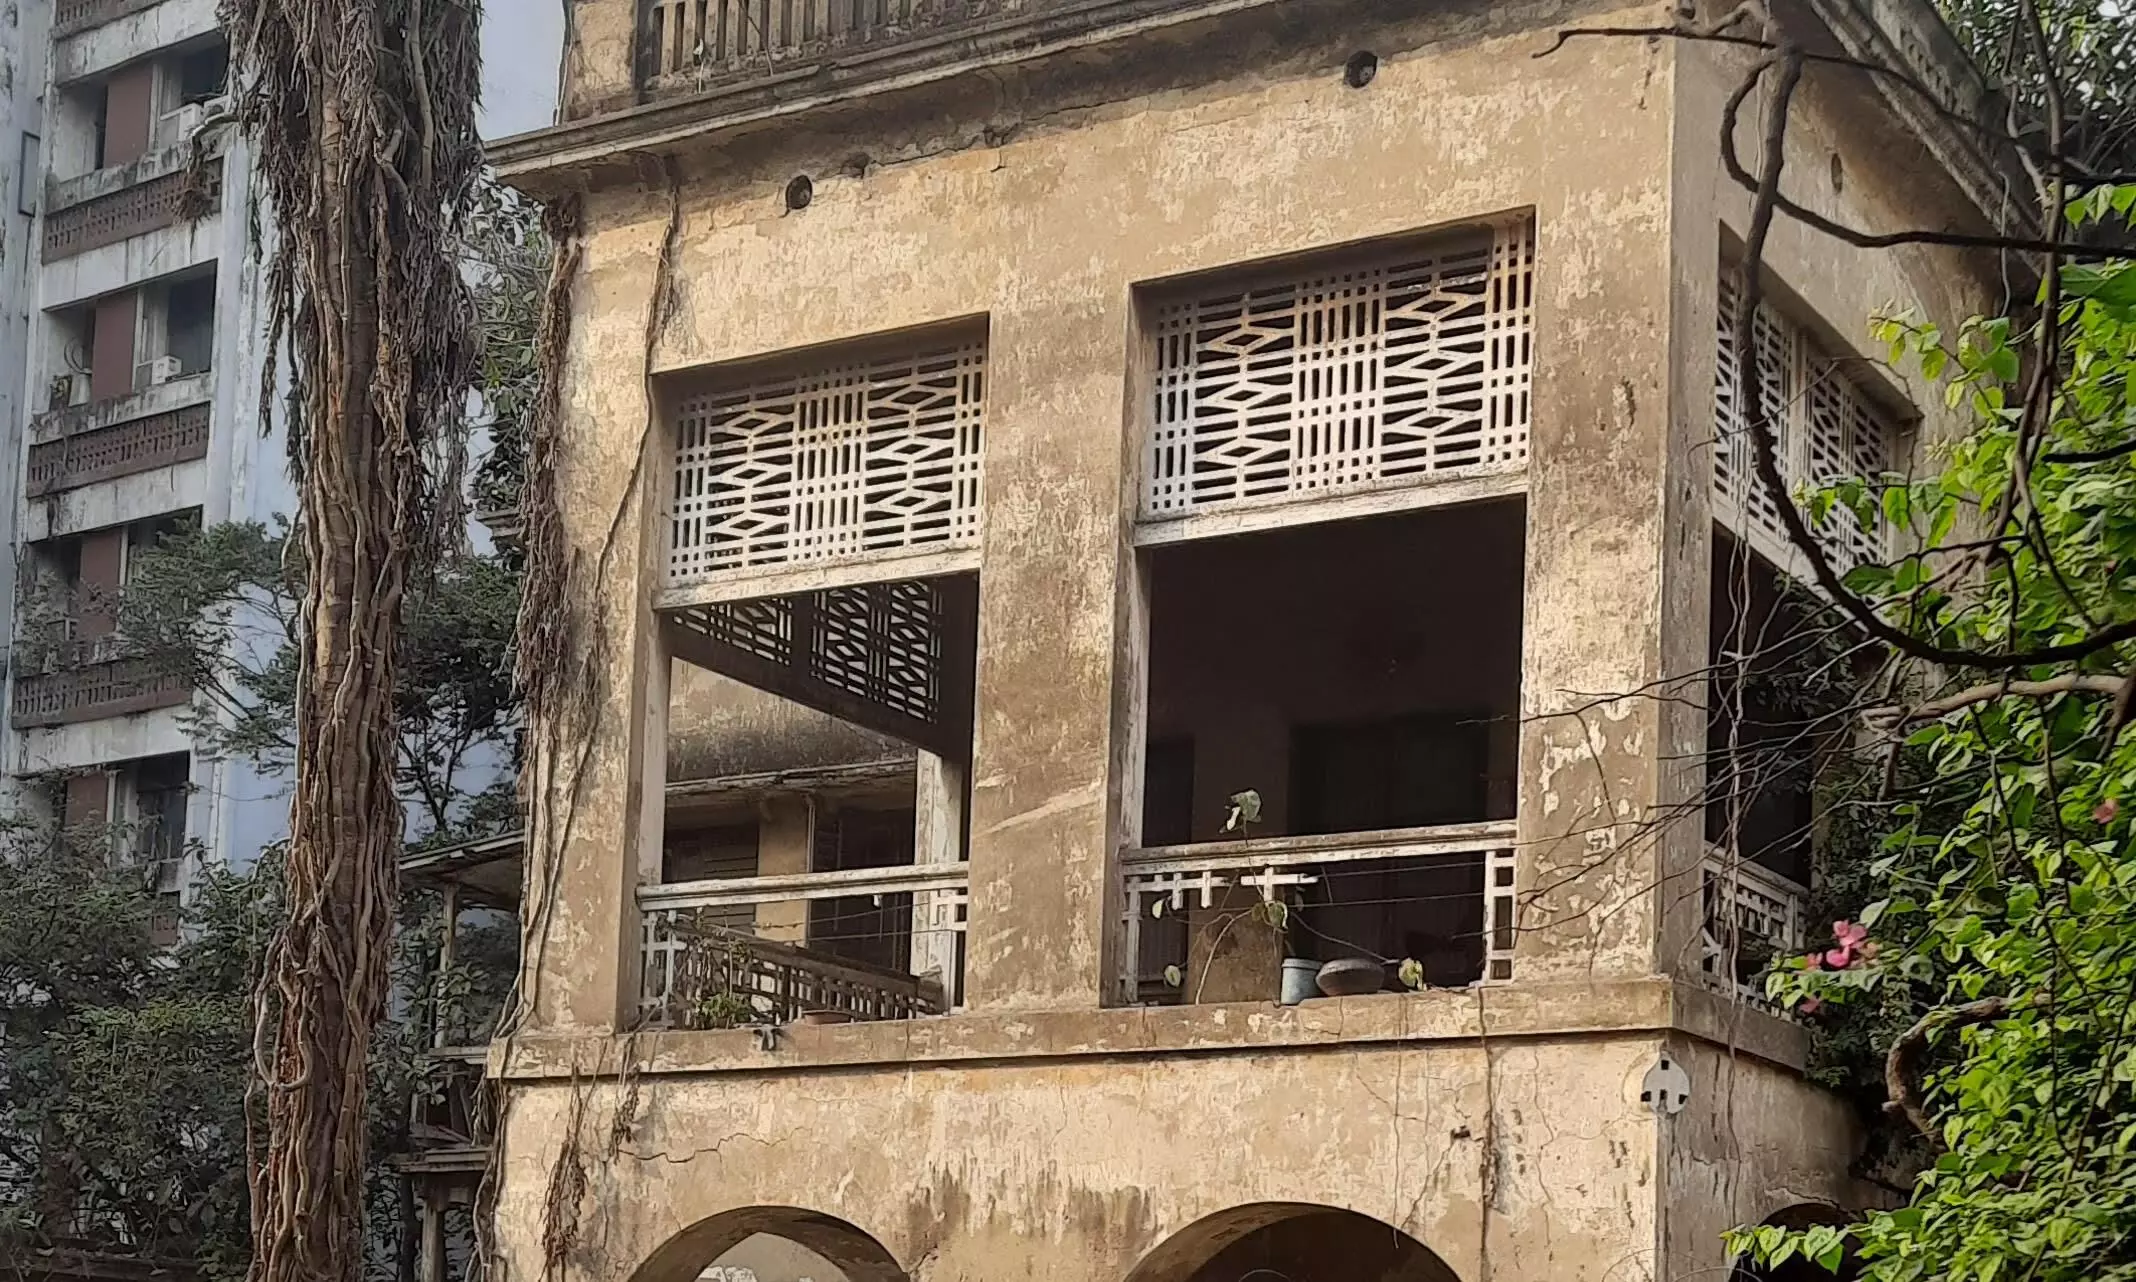 Battle for Kolkatas Heritage: The Apcar Bungalow and the erosion of Citys legacy